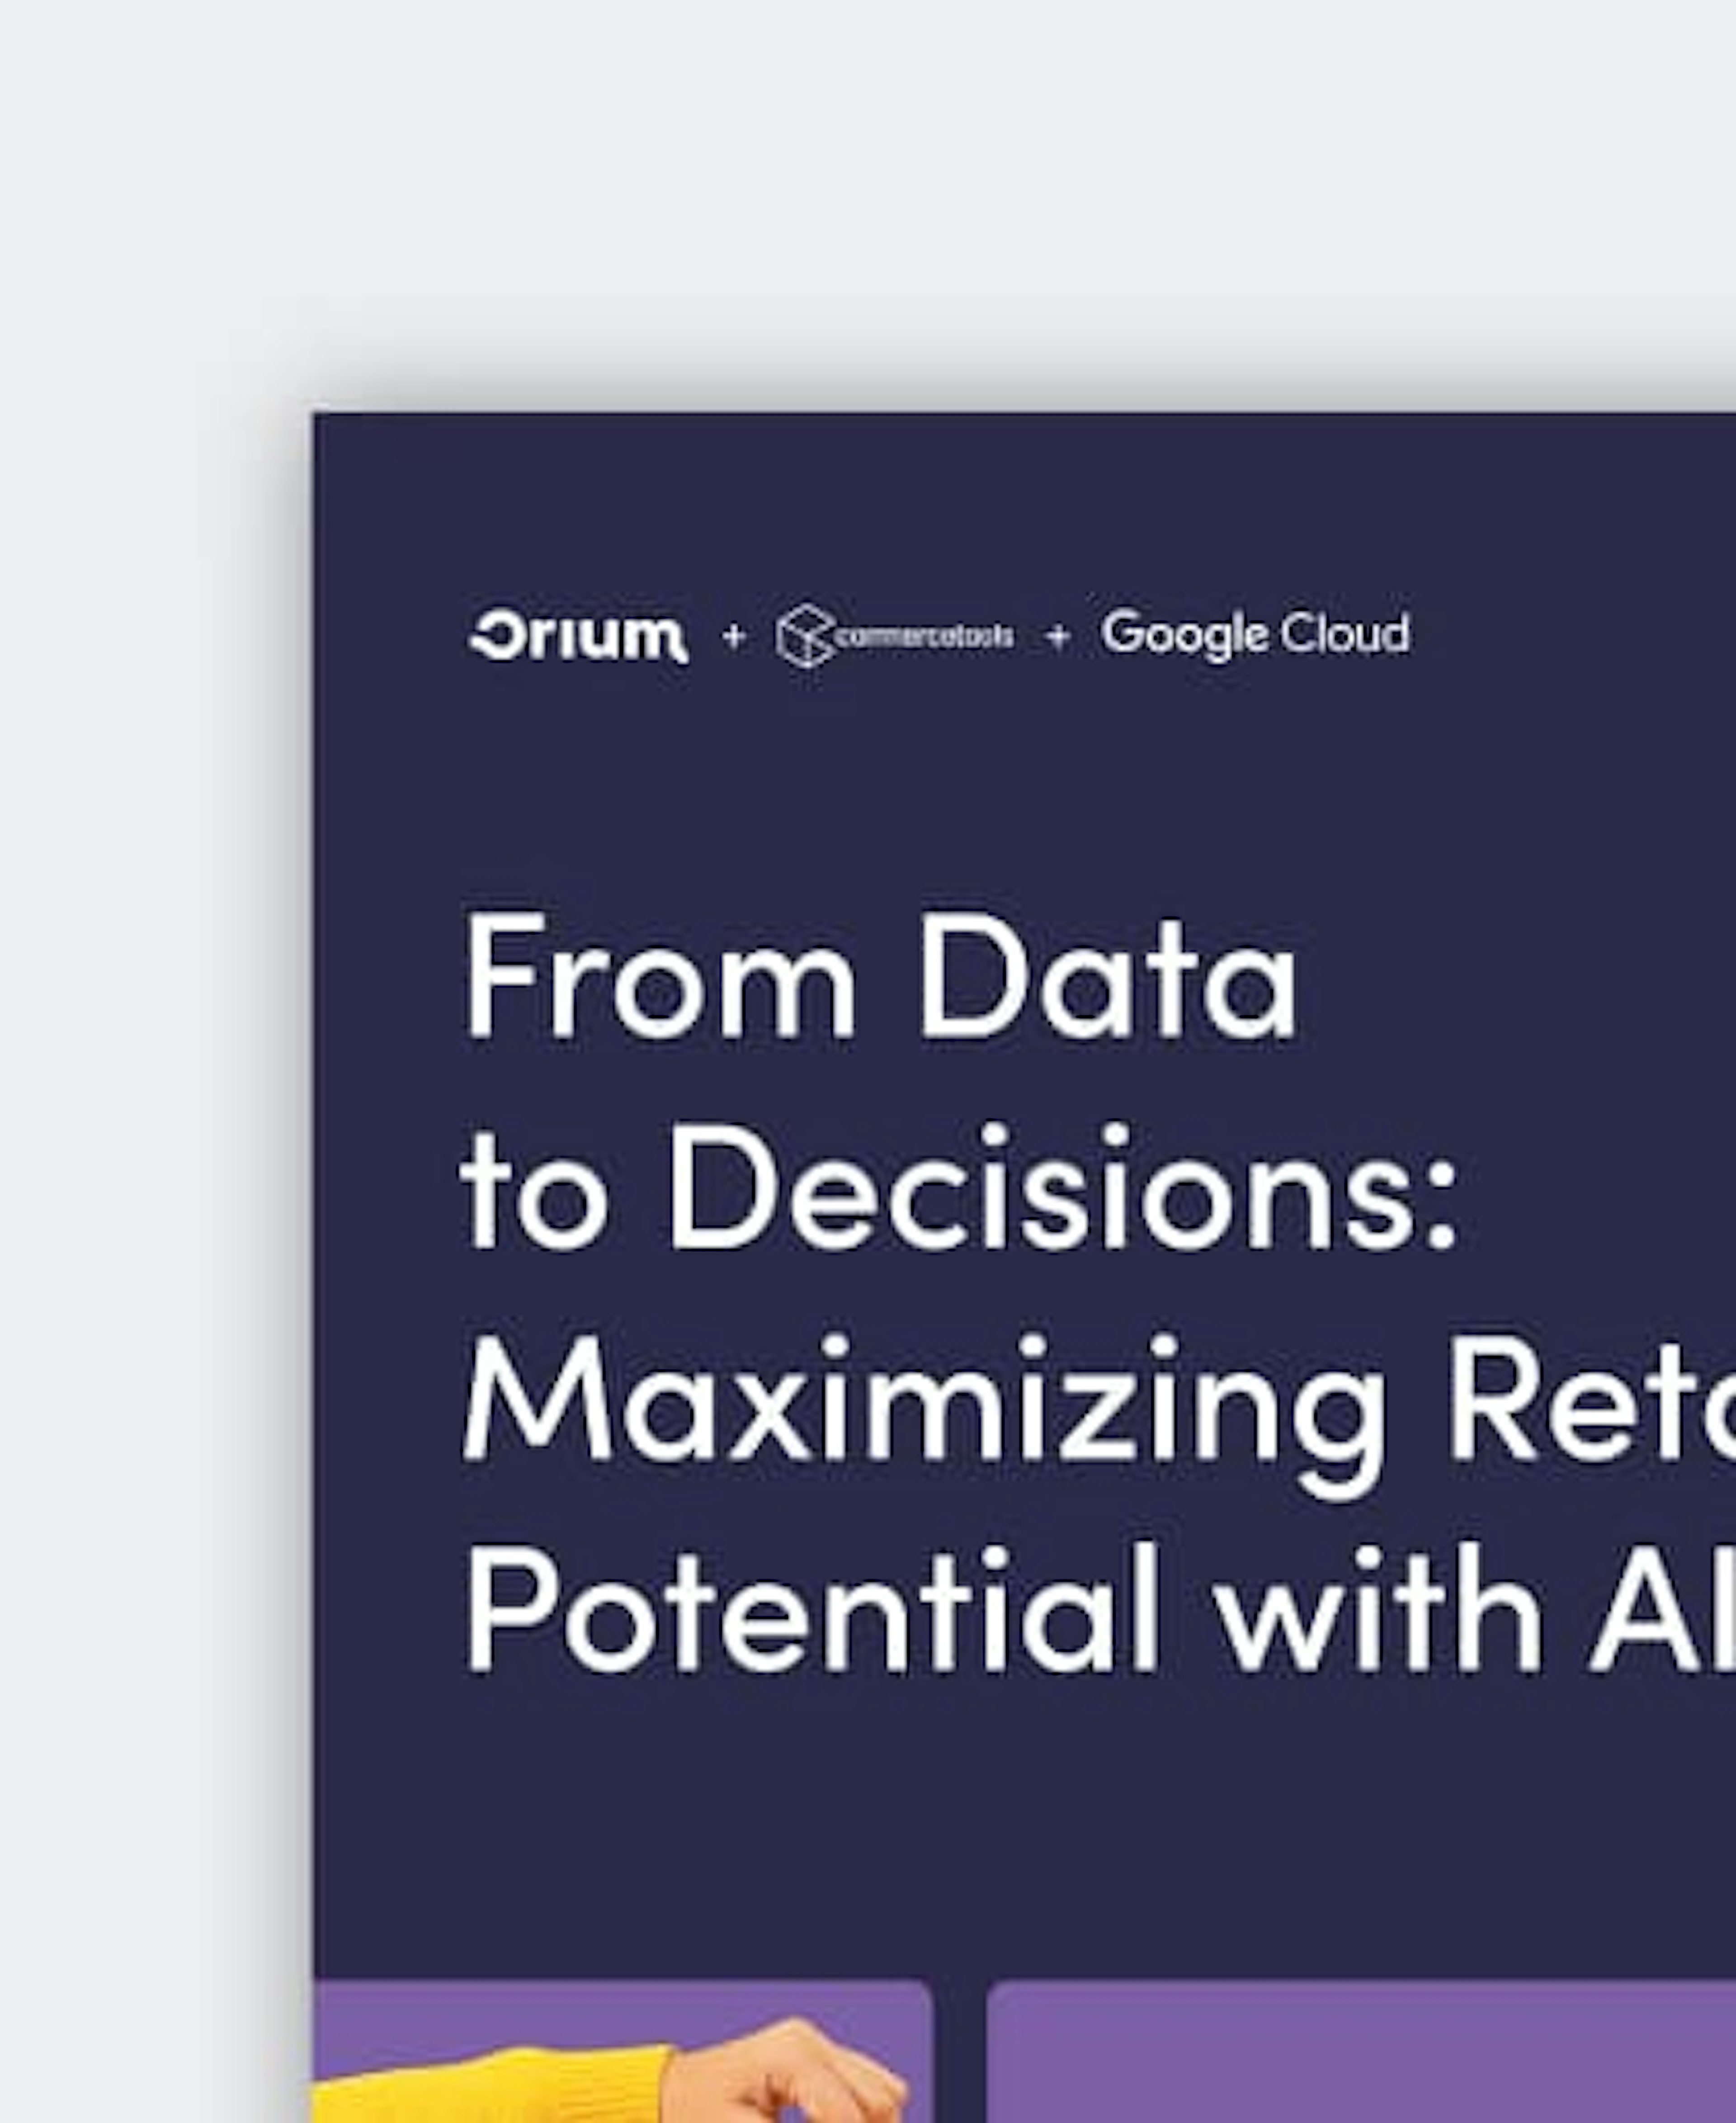 A close-up of the landing page for the "From Data to Decisions: Maximizing Retail Potential with AI" report, presented by Orium, commercetools, and Google Cloud.